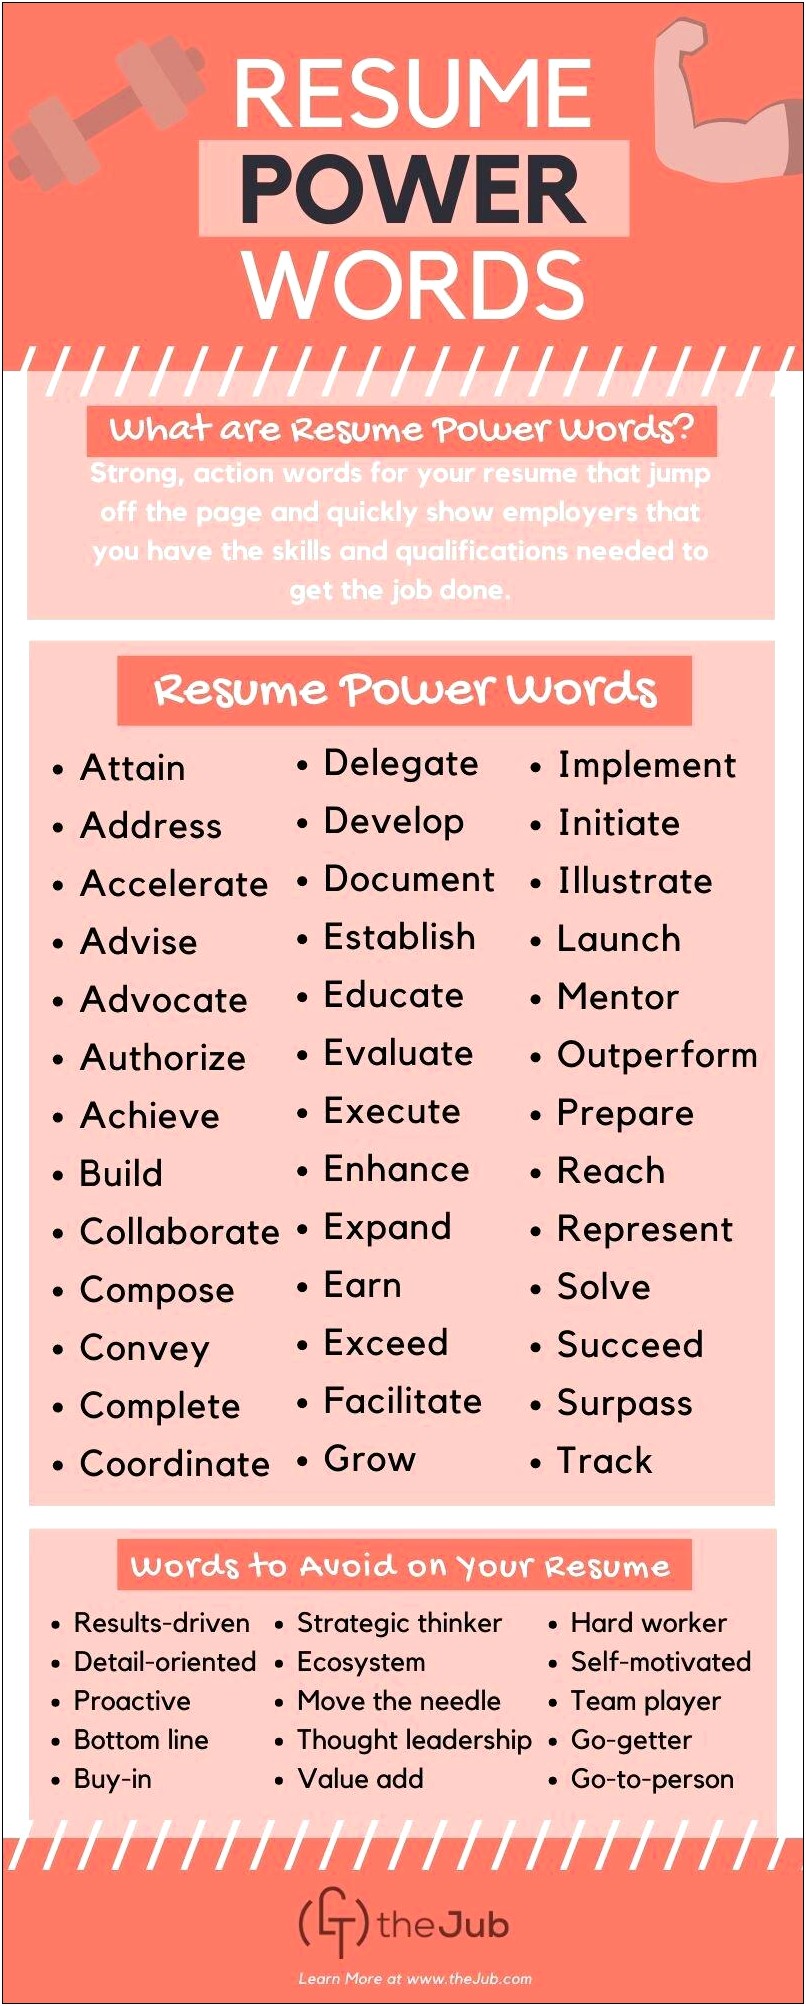 Resume Action Words For Working Together